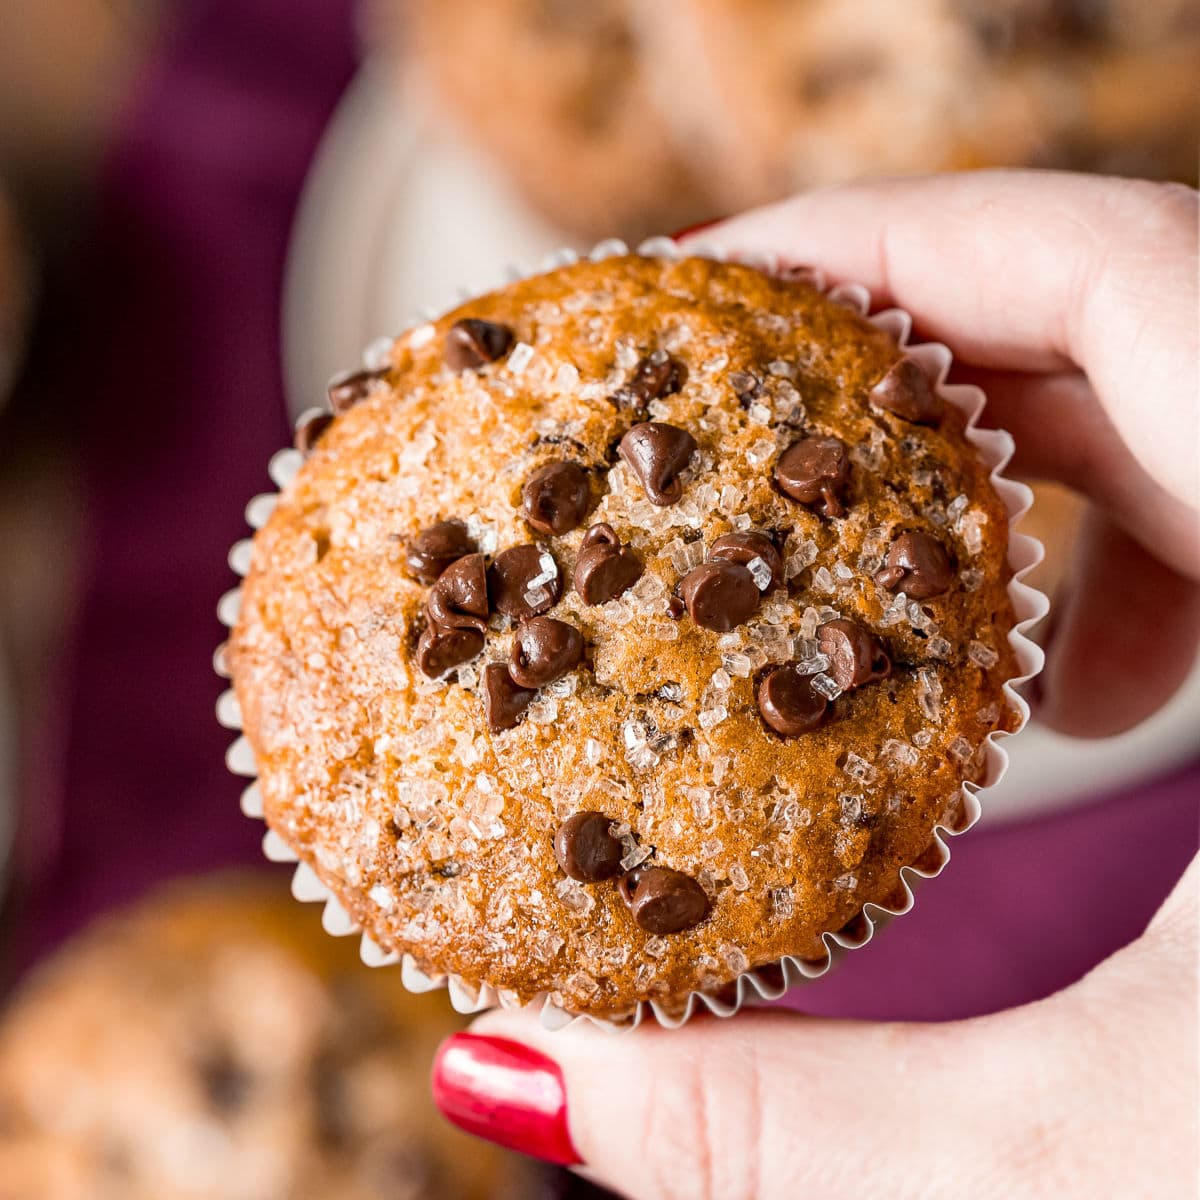 chocolatchocolate chip muffin being held over a plate of muffins